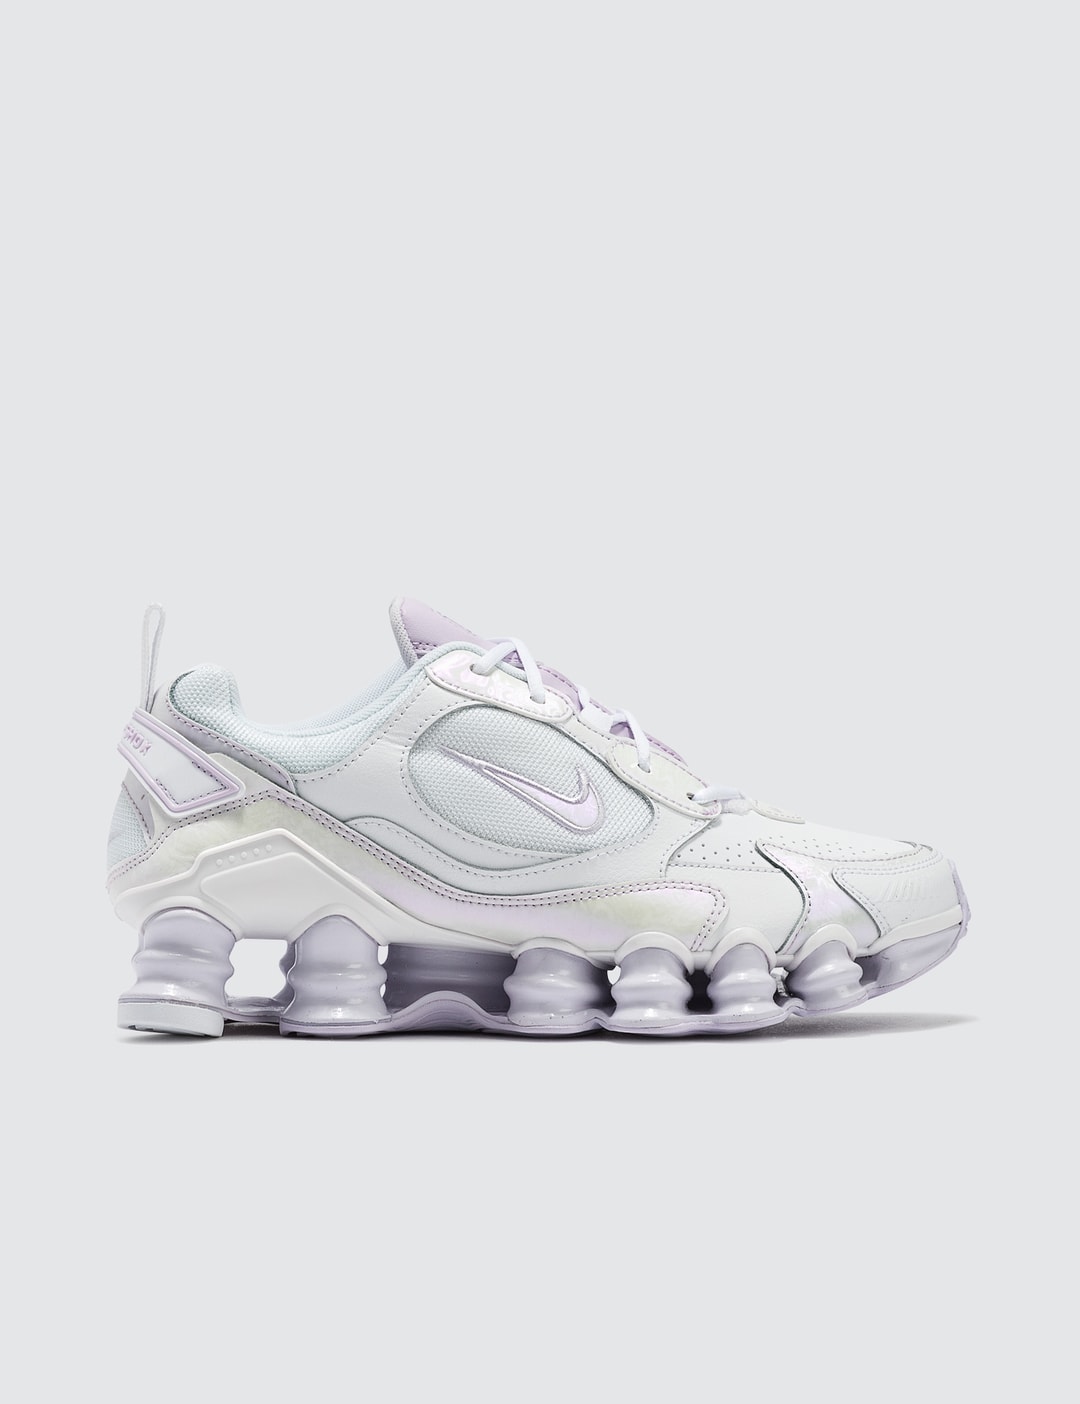 Nike Shox TL | HBX - Globally Curated Fashion and Lifestyle by Hypebeast